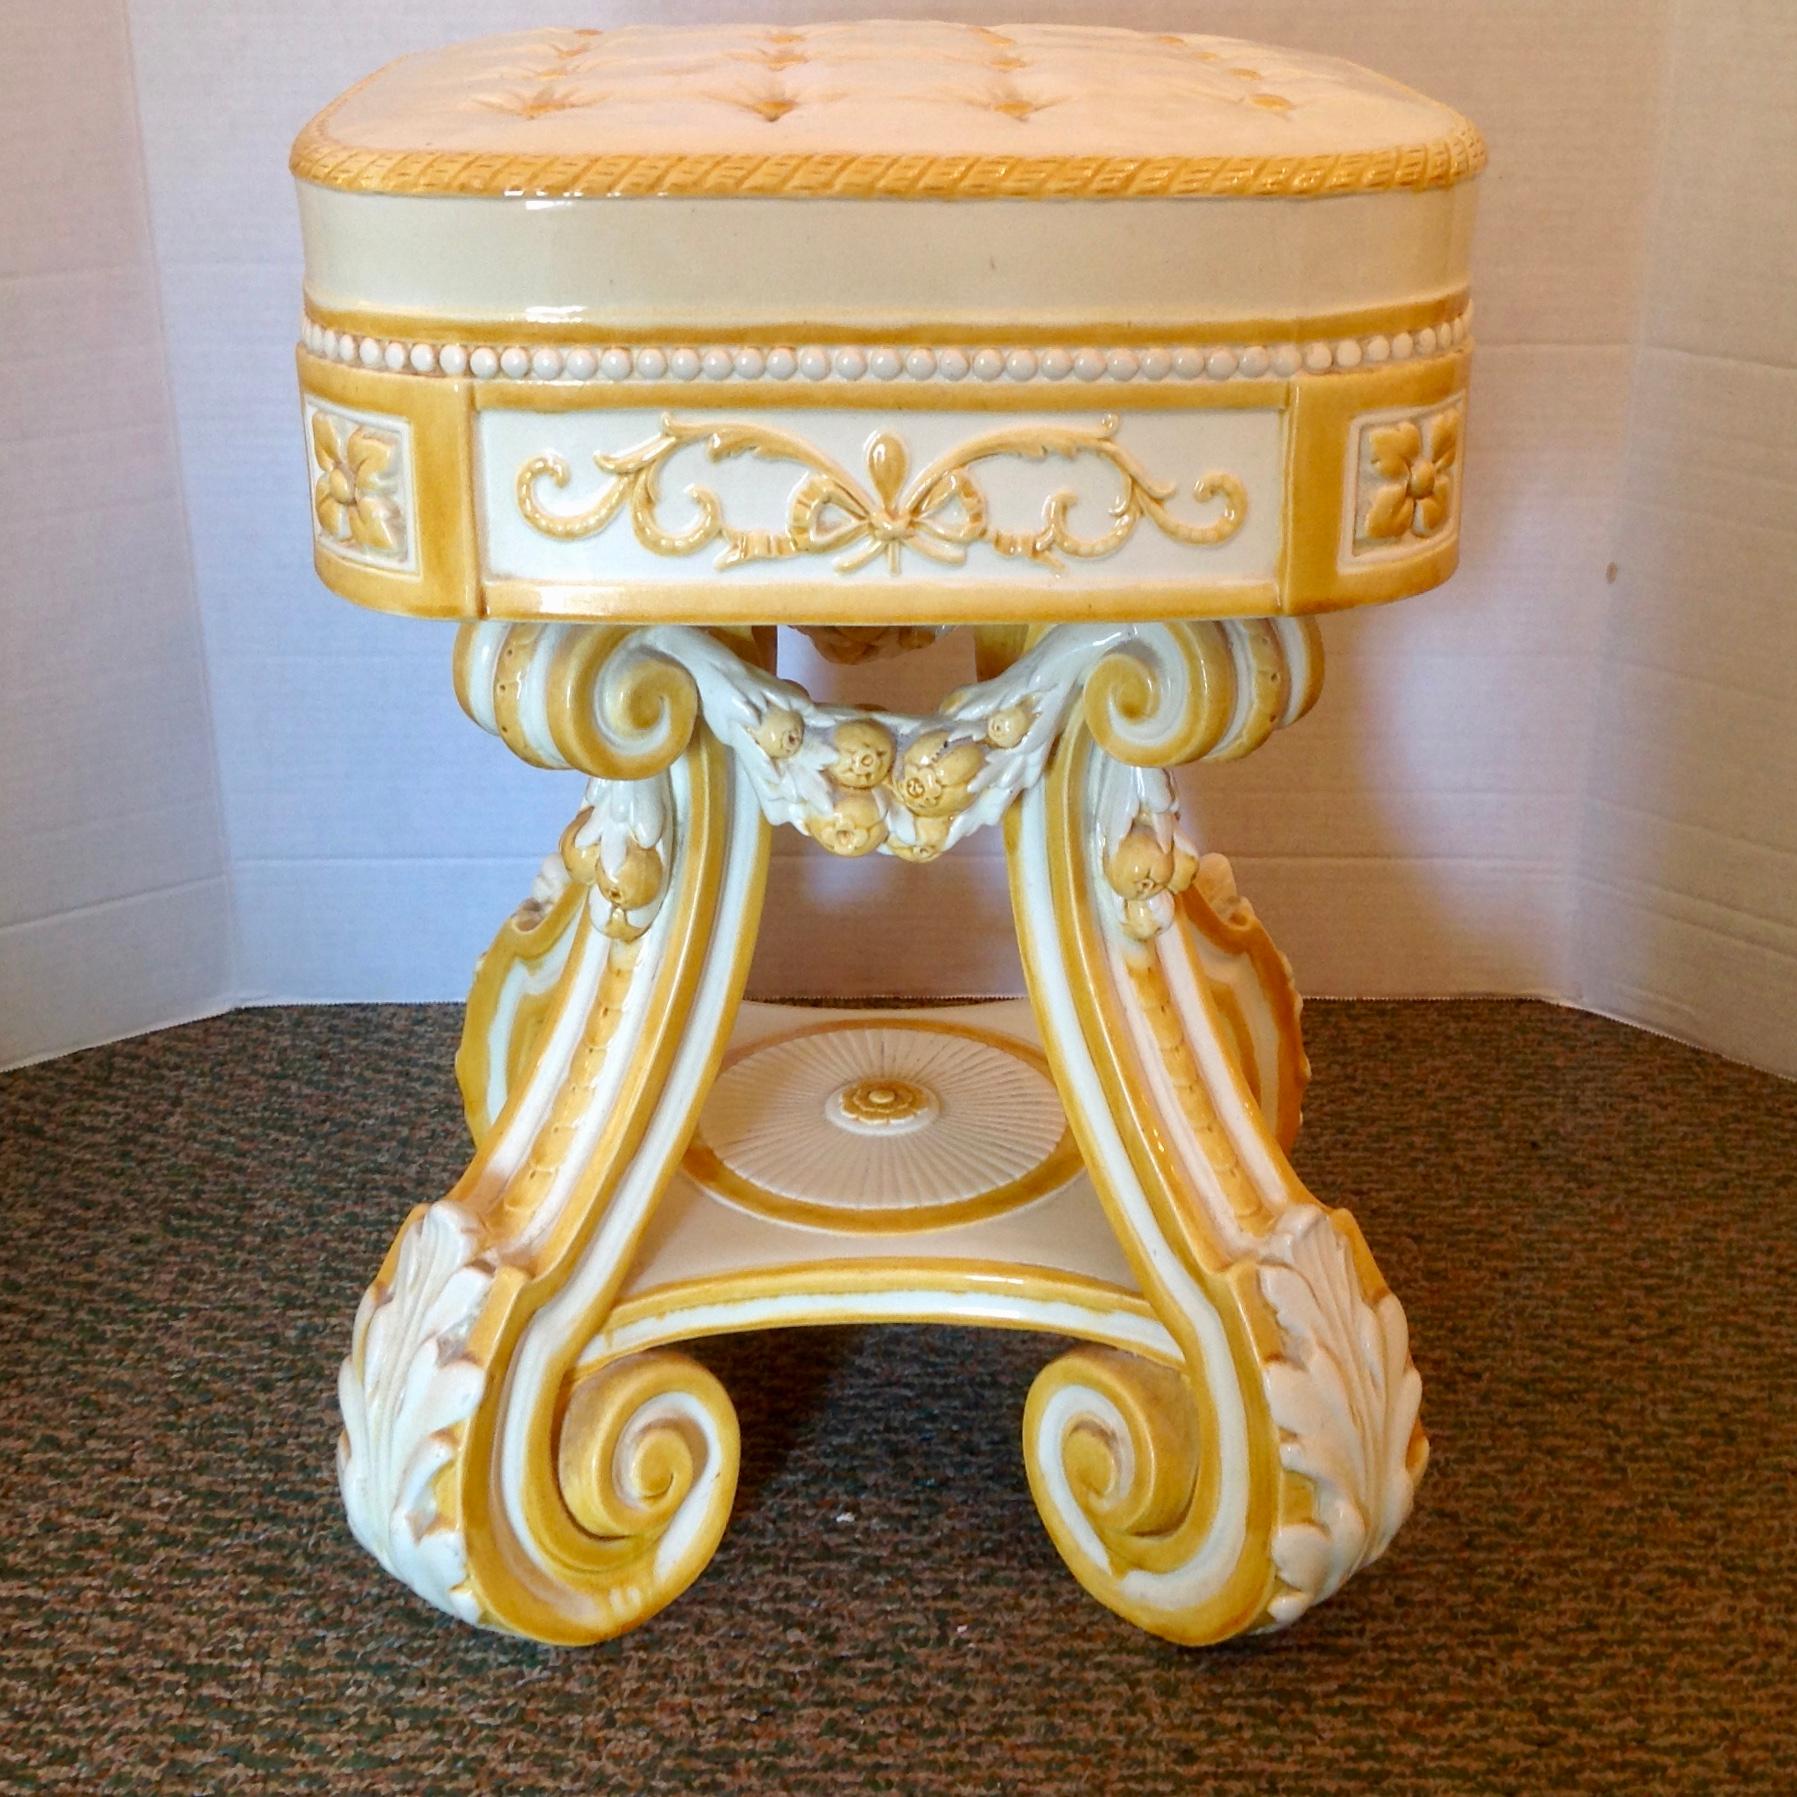 Rare and superb garden seat form - fashioned with a cushion like top raised upon scroll form legs. A truly superior garden seat. Beautiful yellow cream glaze.